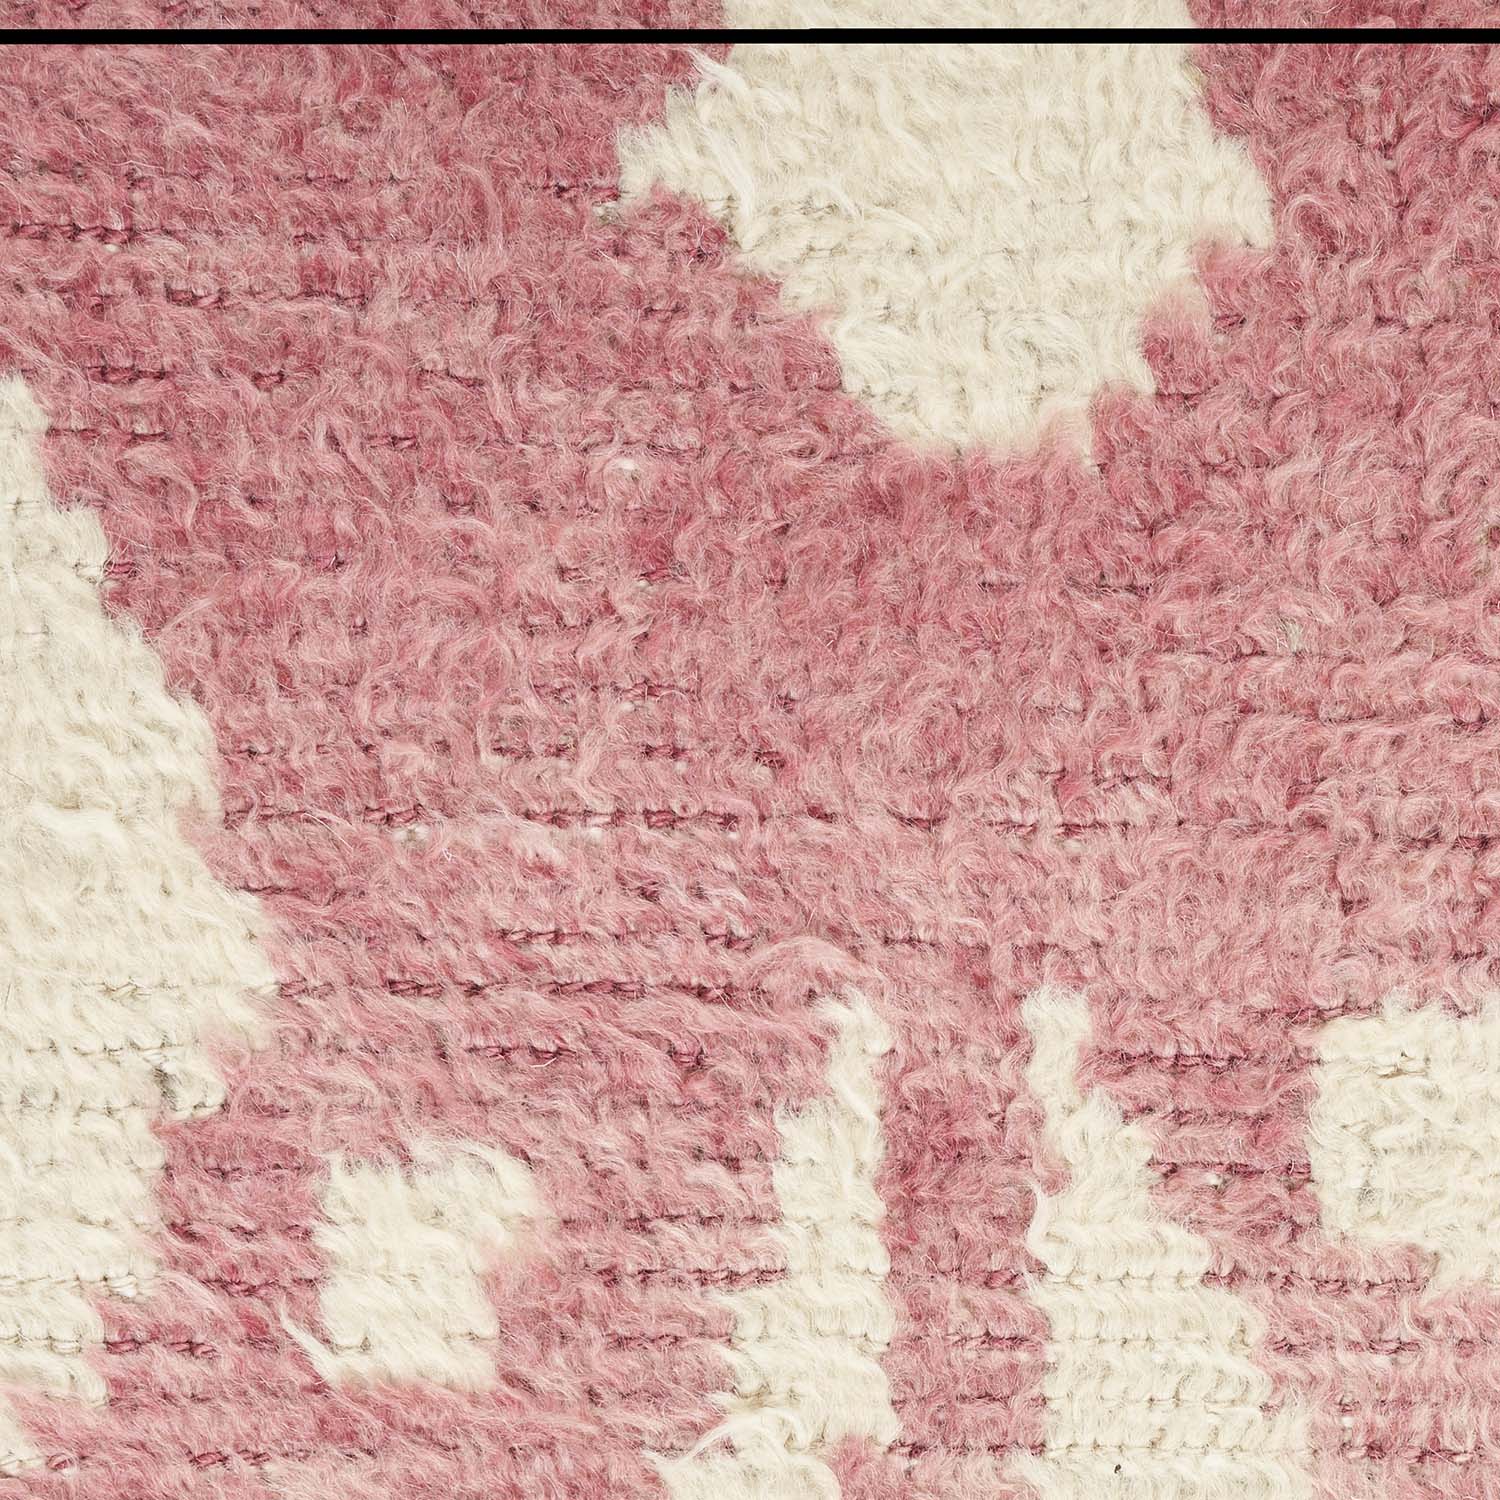 Muted pink textured fabric with fluffy appearance and irregular white patches.